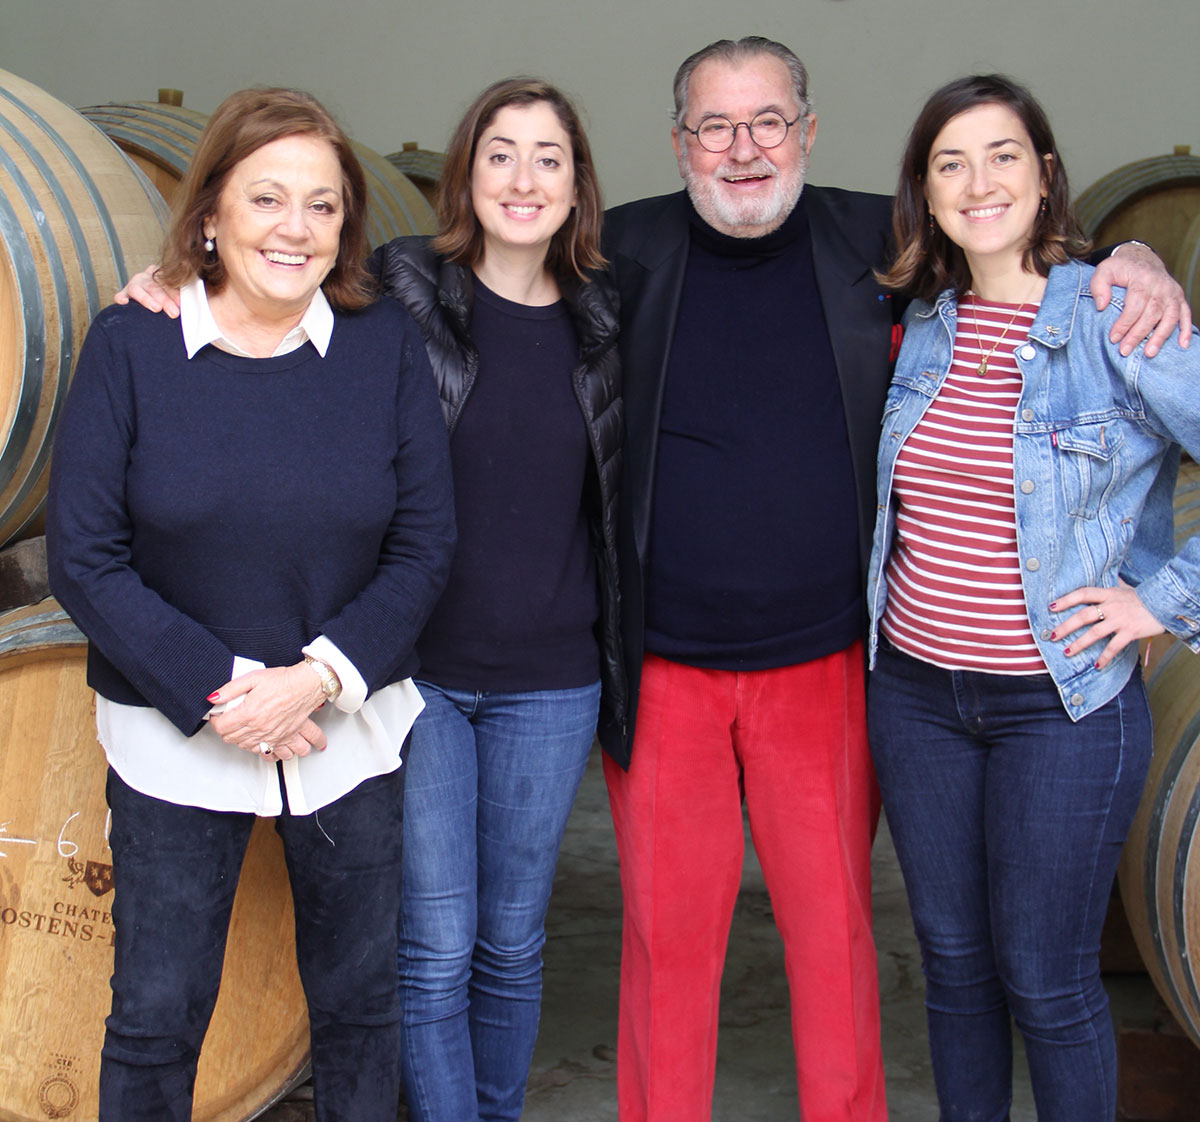 The family that owns Chateau Hostens-Picant: Nadine, Valentine, Yves and Charlotte Picant.